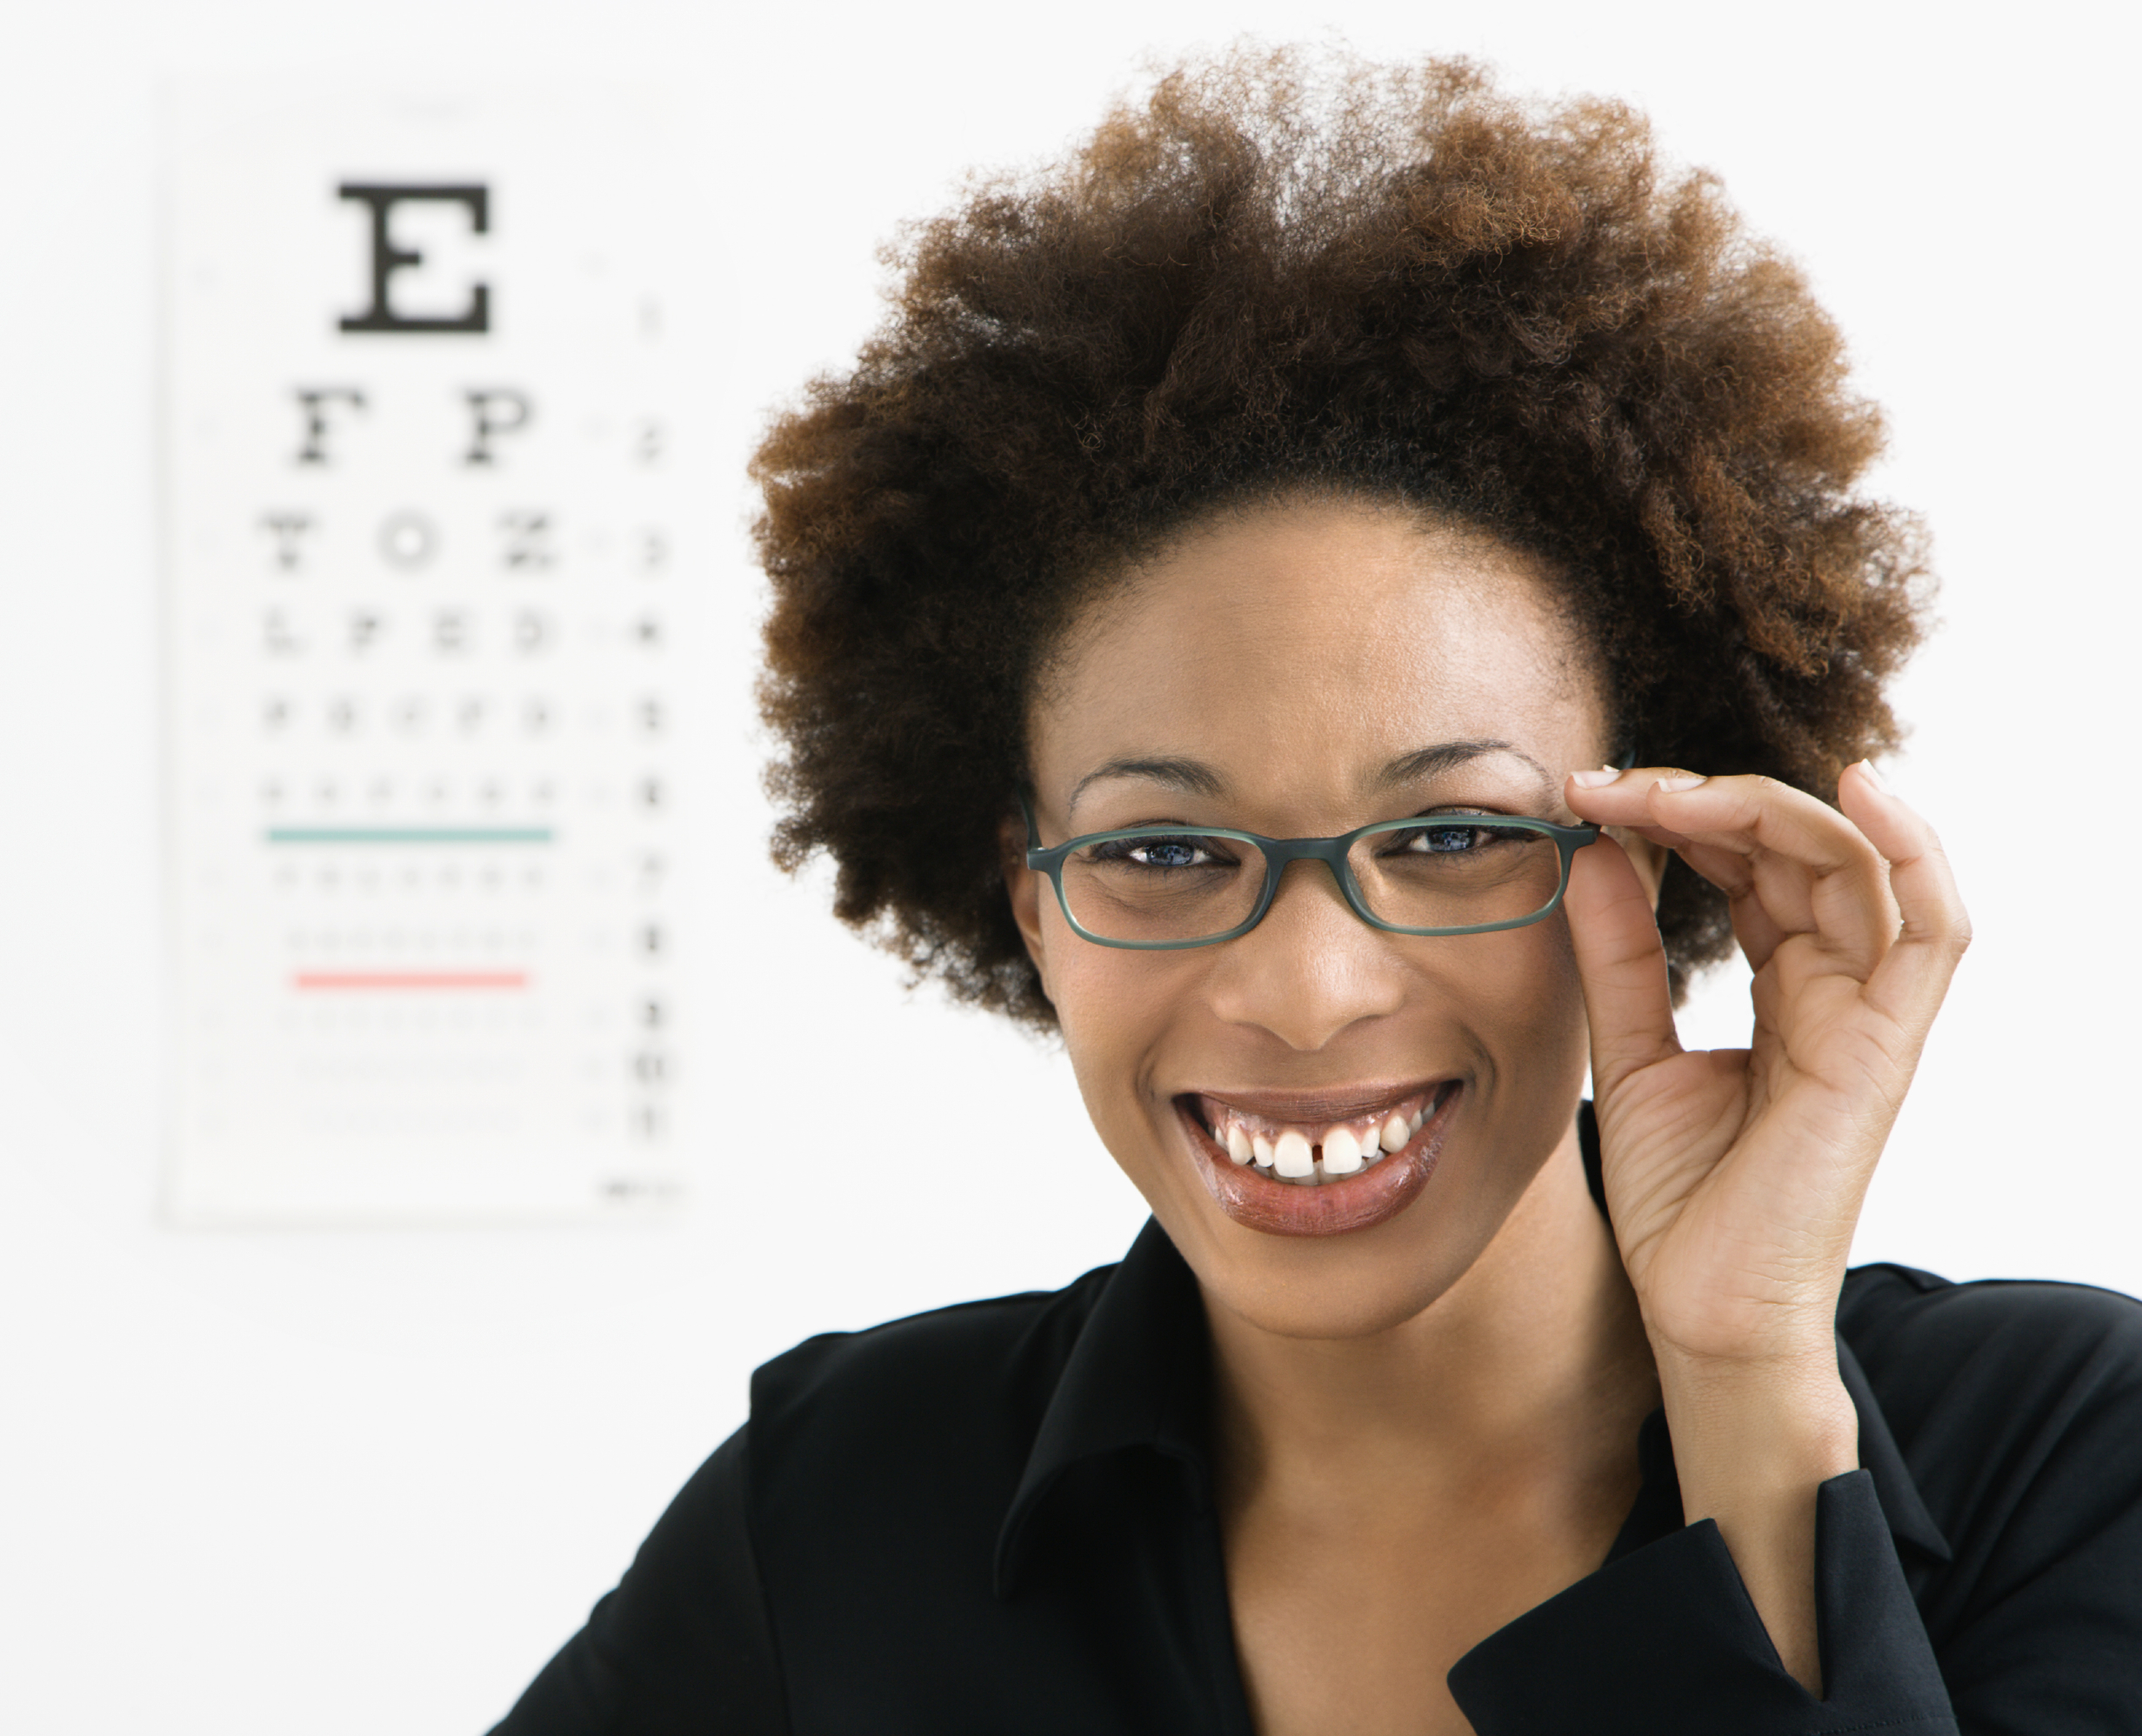 The Natural Methods To Care For Your Vision That You Didn't Know About